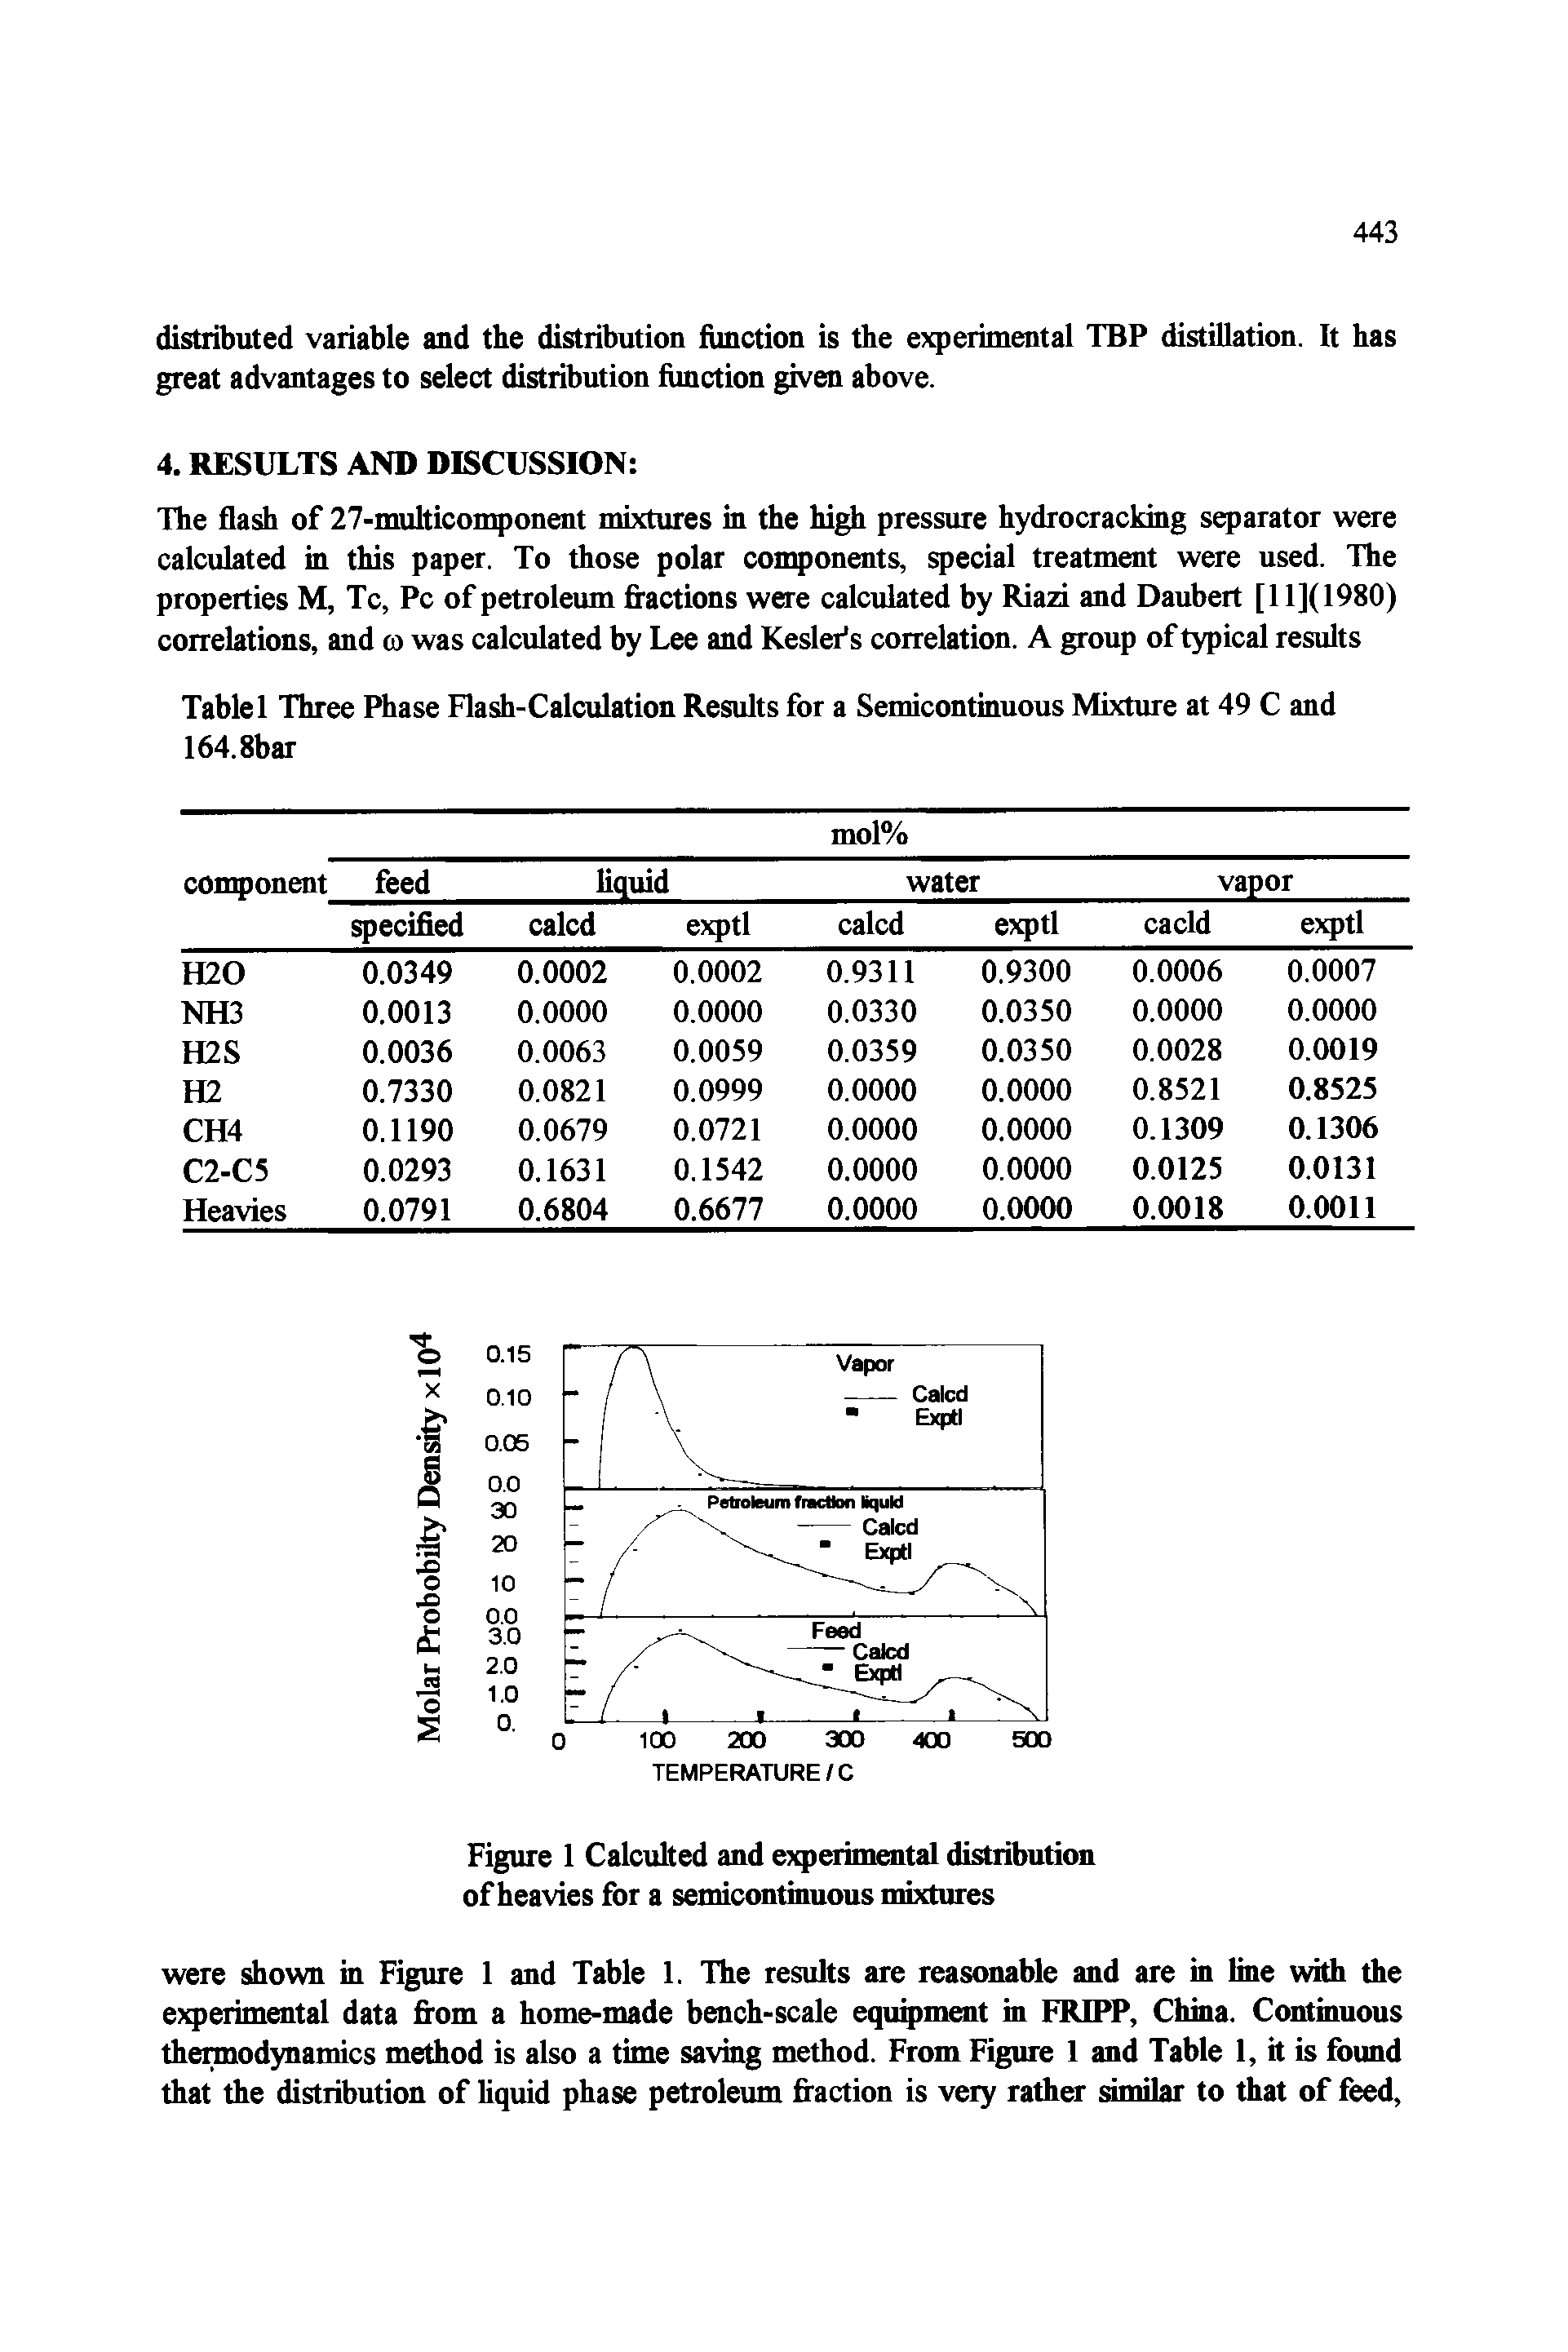 Table 1 Three Phase Flash-Calculation Results for a Semicontinuous Mixture at 49 C and 164.8bar...